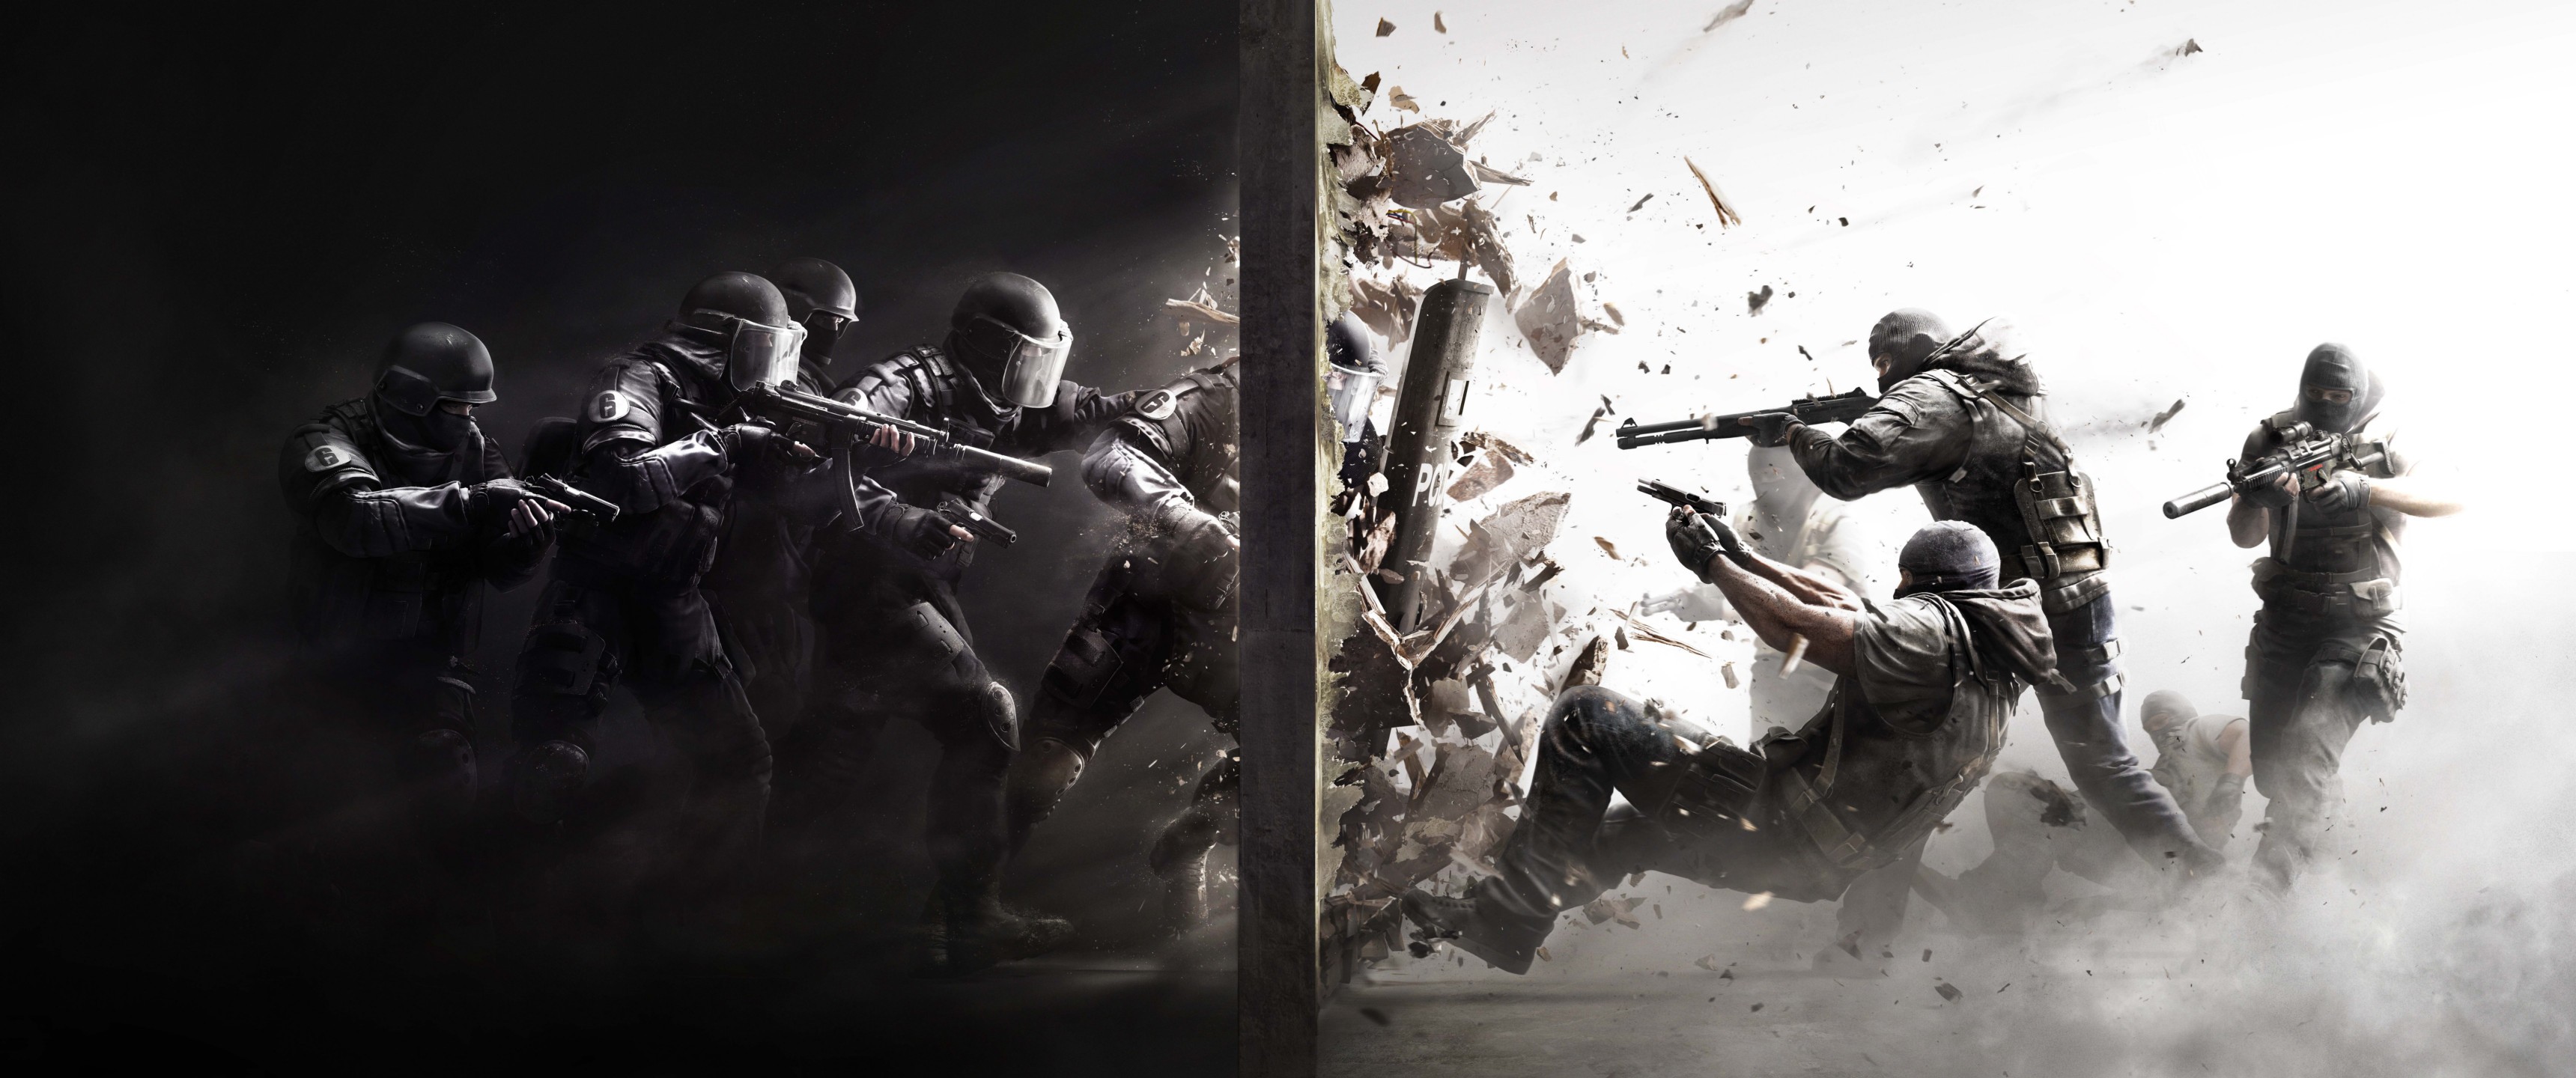 General 3440x1440 Rainbow Six: Siege video games video game art weapon PC gaming